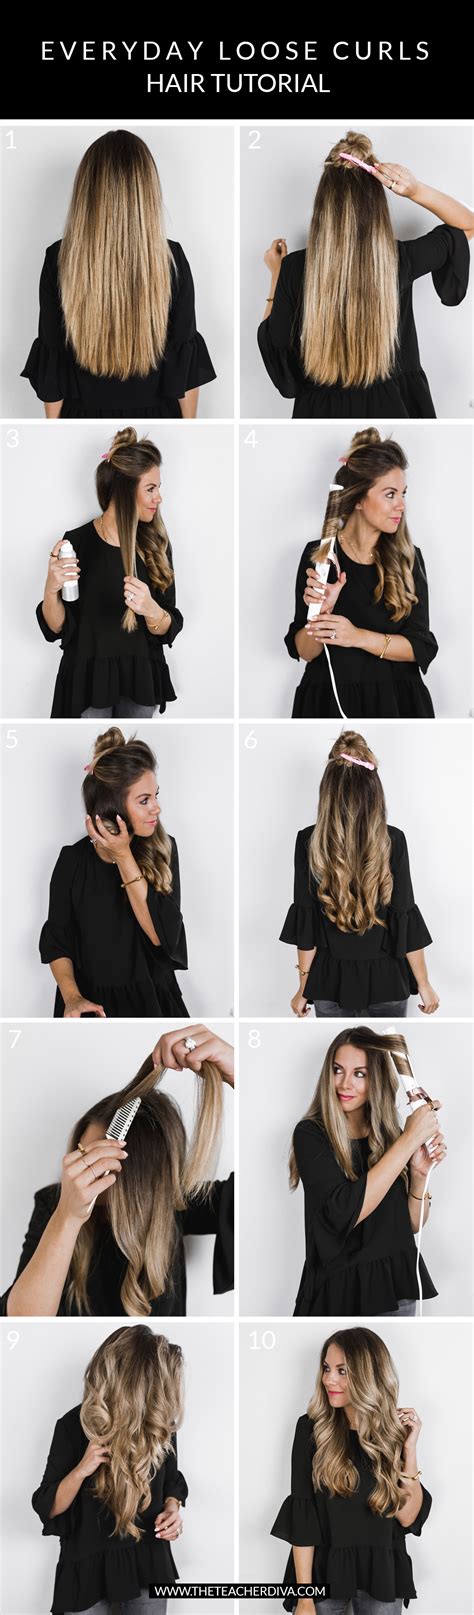 30 How To Get Soft Wavy Hair